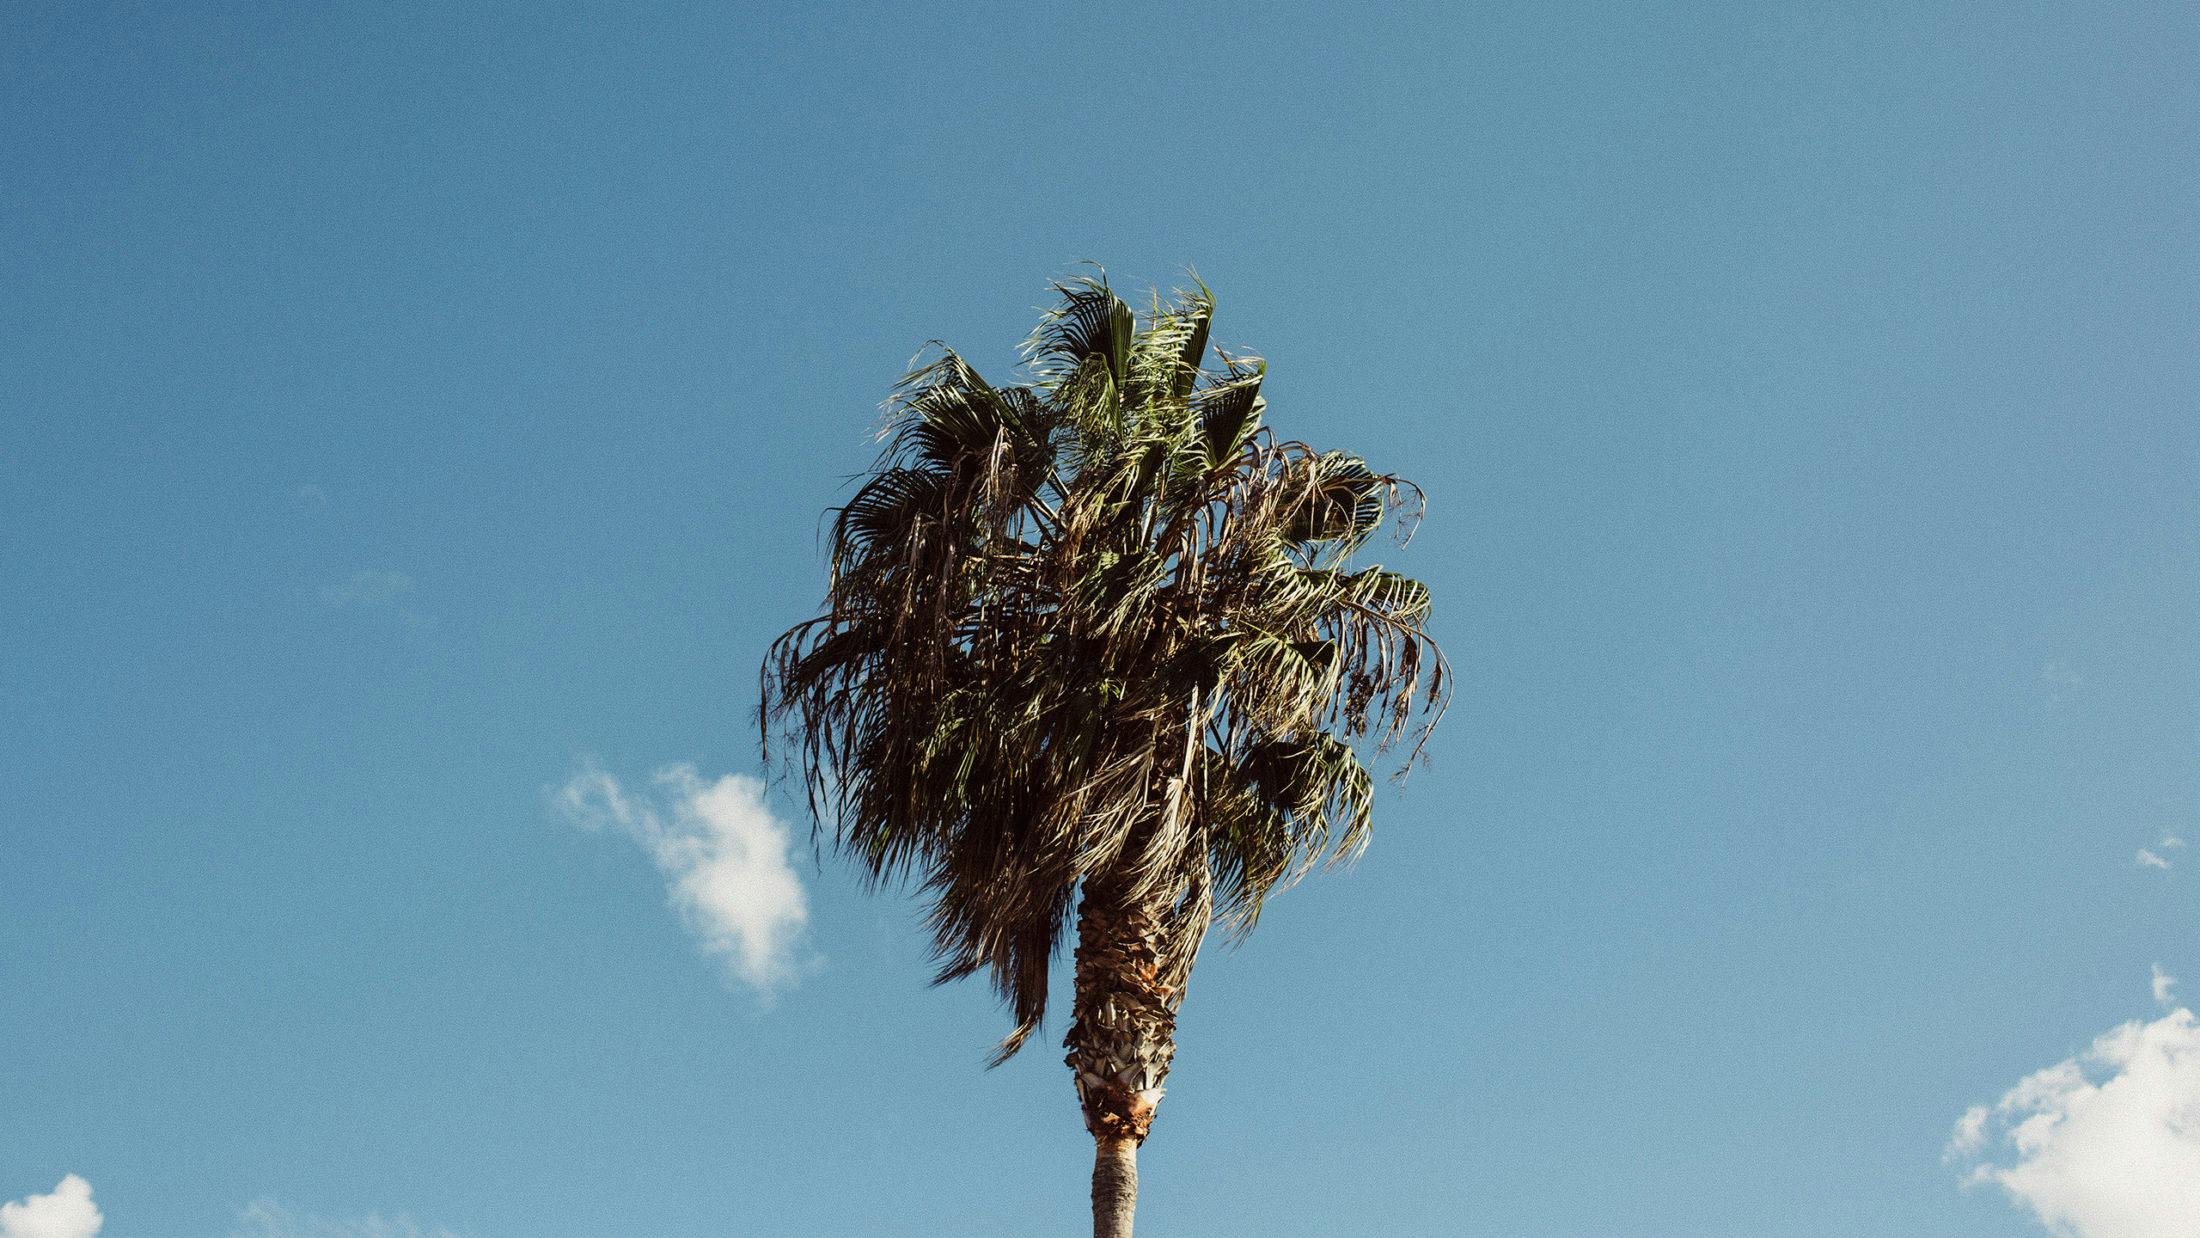 The top of a palm tree